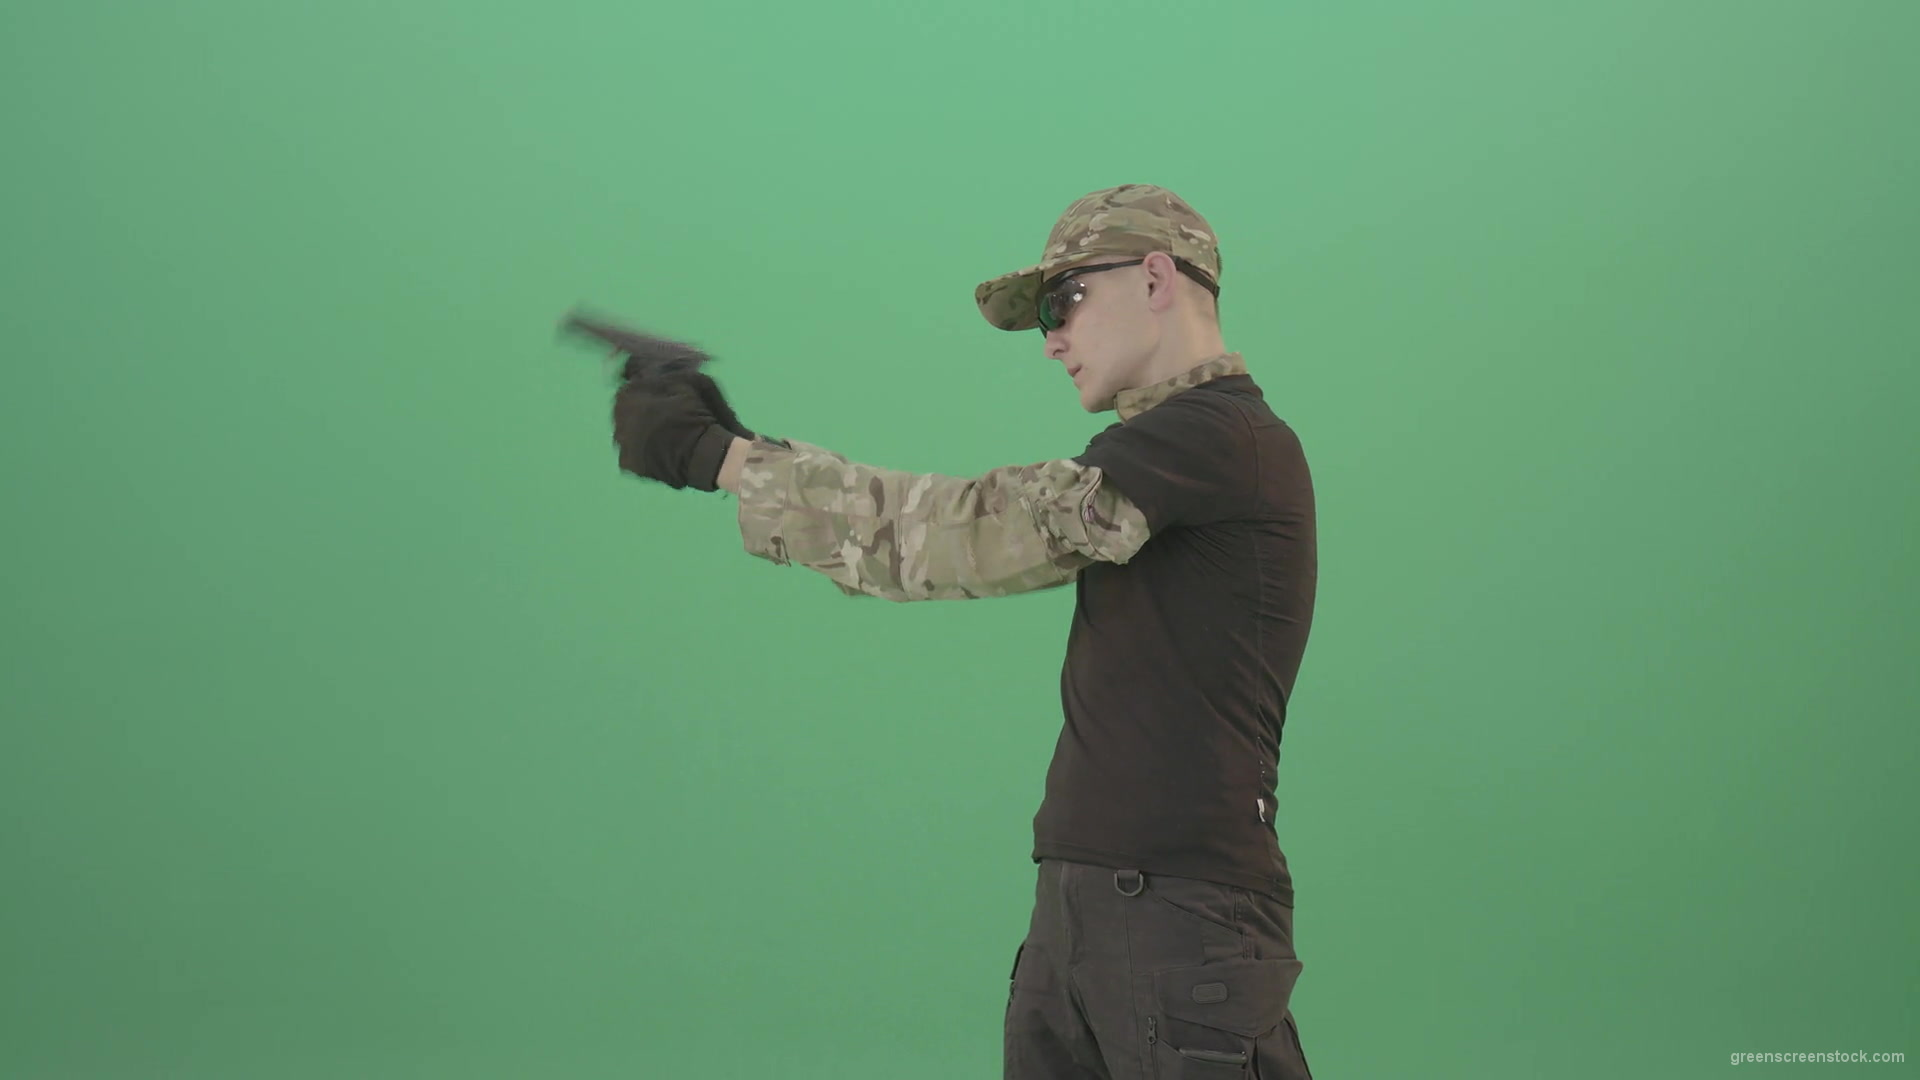 Army-Man-Assassin-shooting-with-small-gun-isolated-on-green-screen-4K-Video-Footage-1920_007 Green Screen Stock